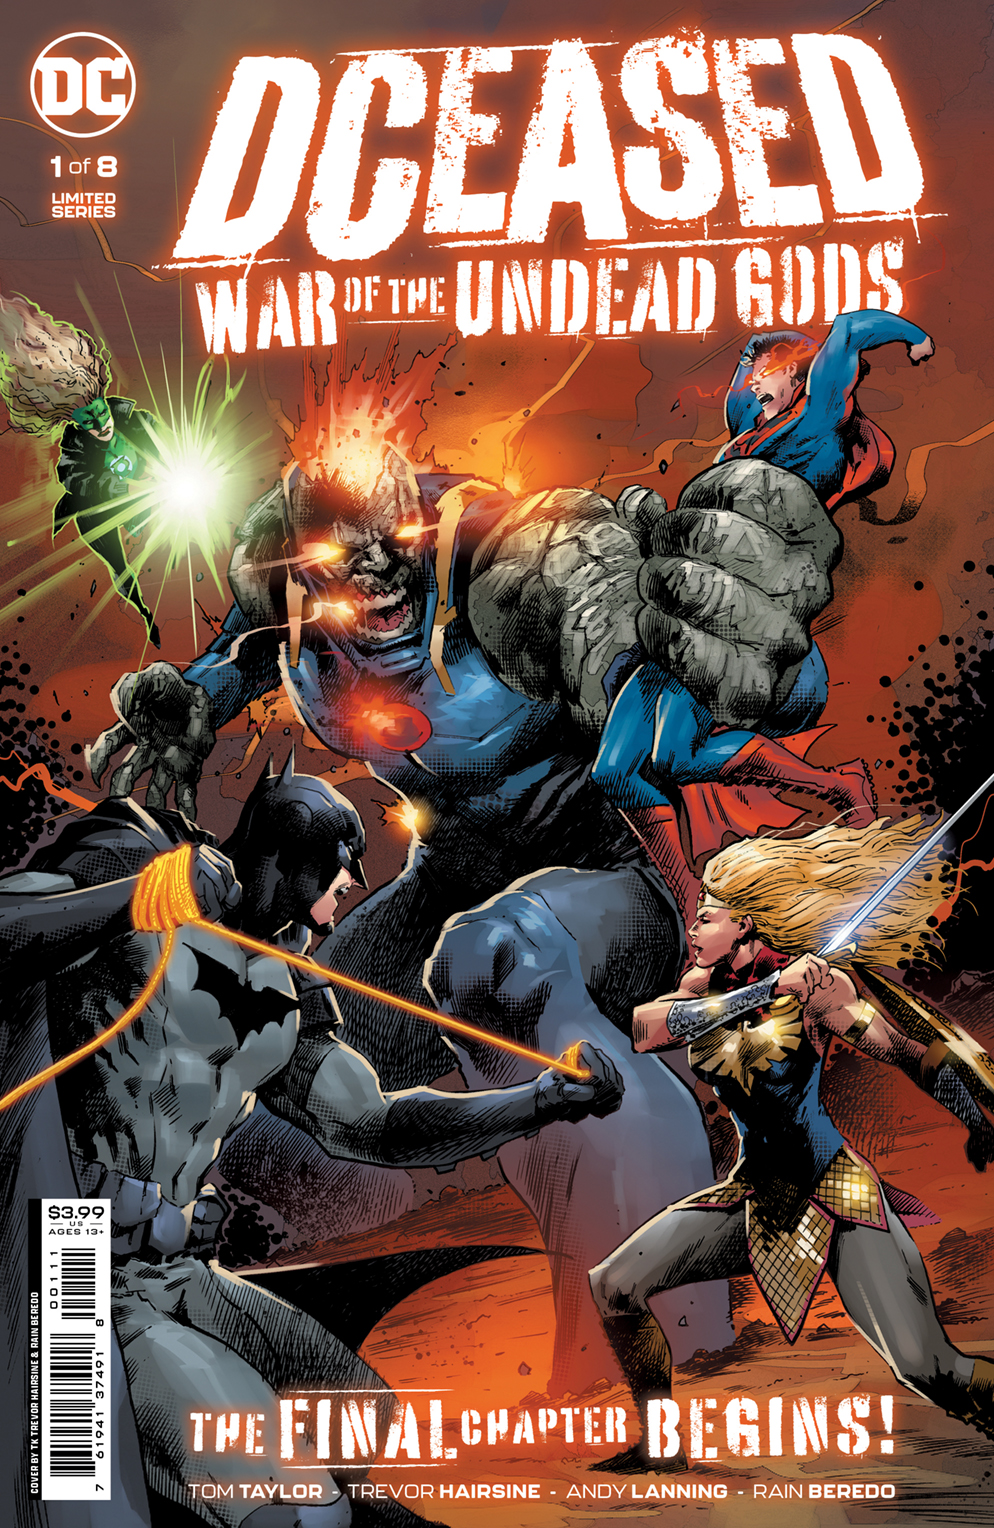 DCeased War of the Undead Gods #1 Cover A Trevor Hairsine (Of 8)